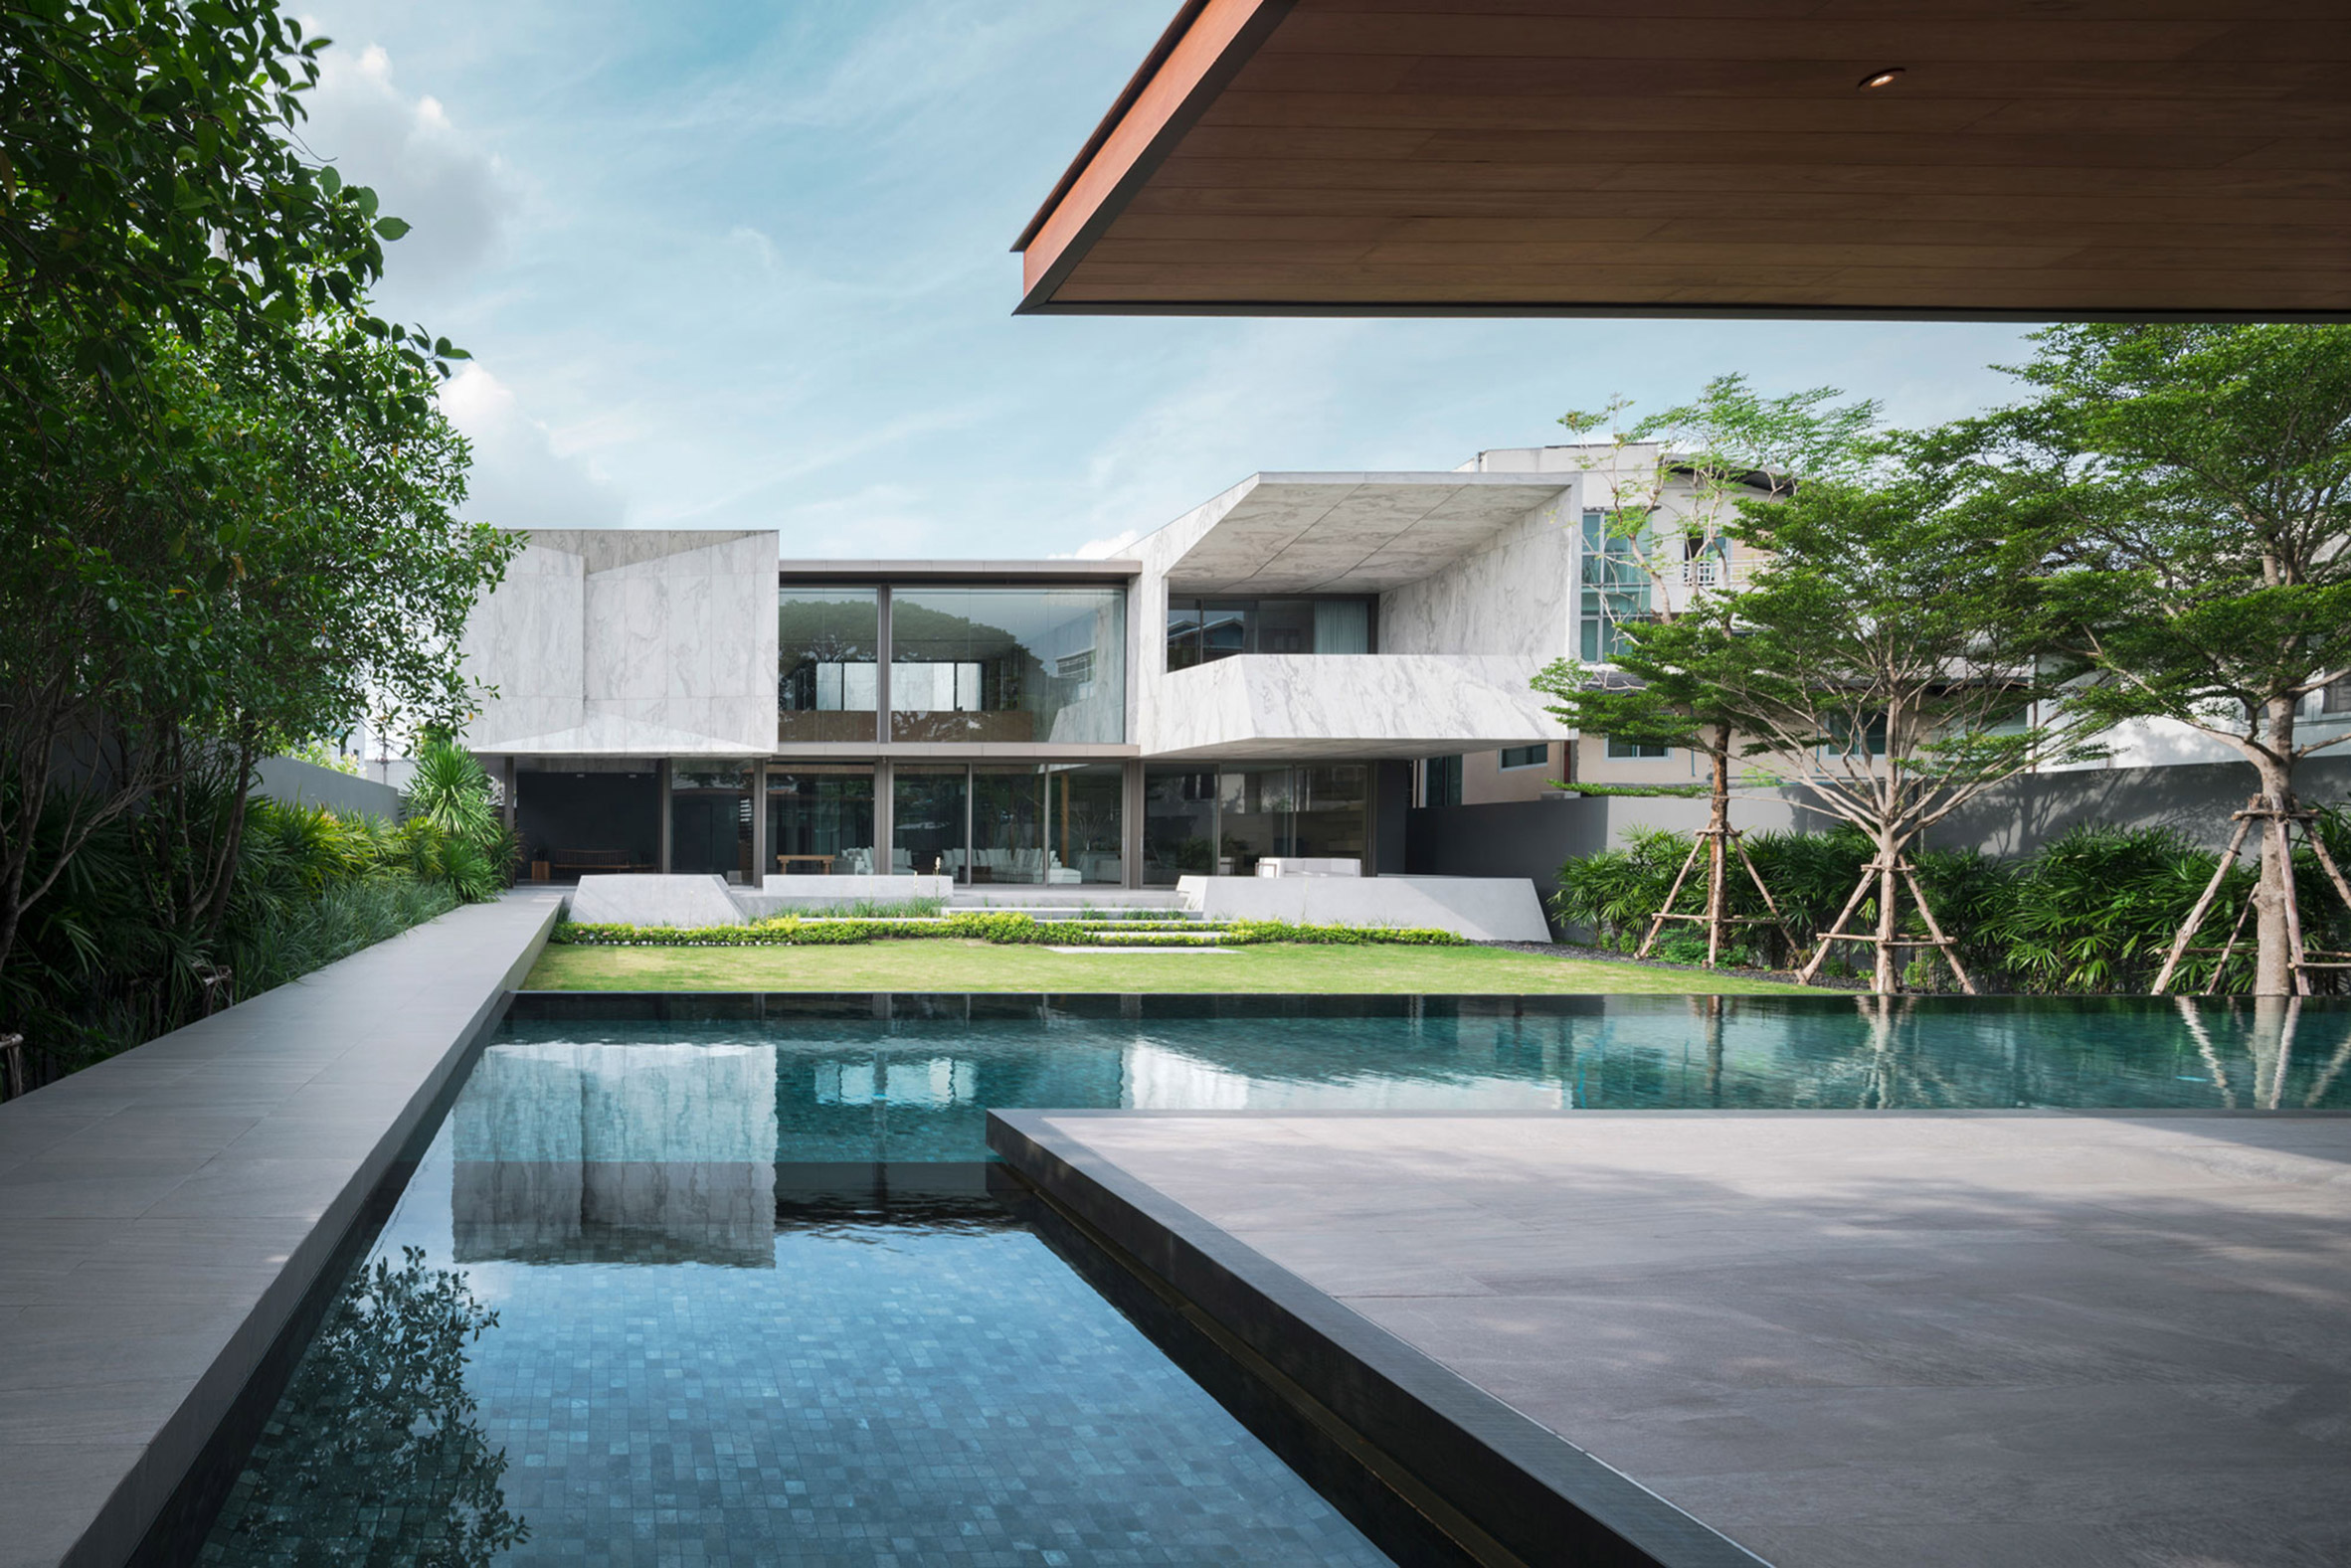 Openbox Architects tops Bangkok house with "monolithic piece of marble sculpture"